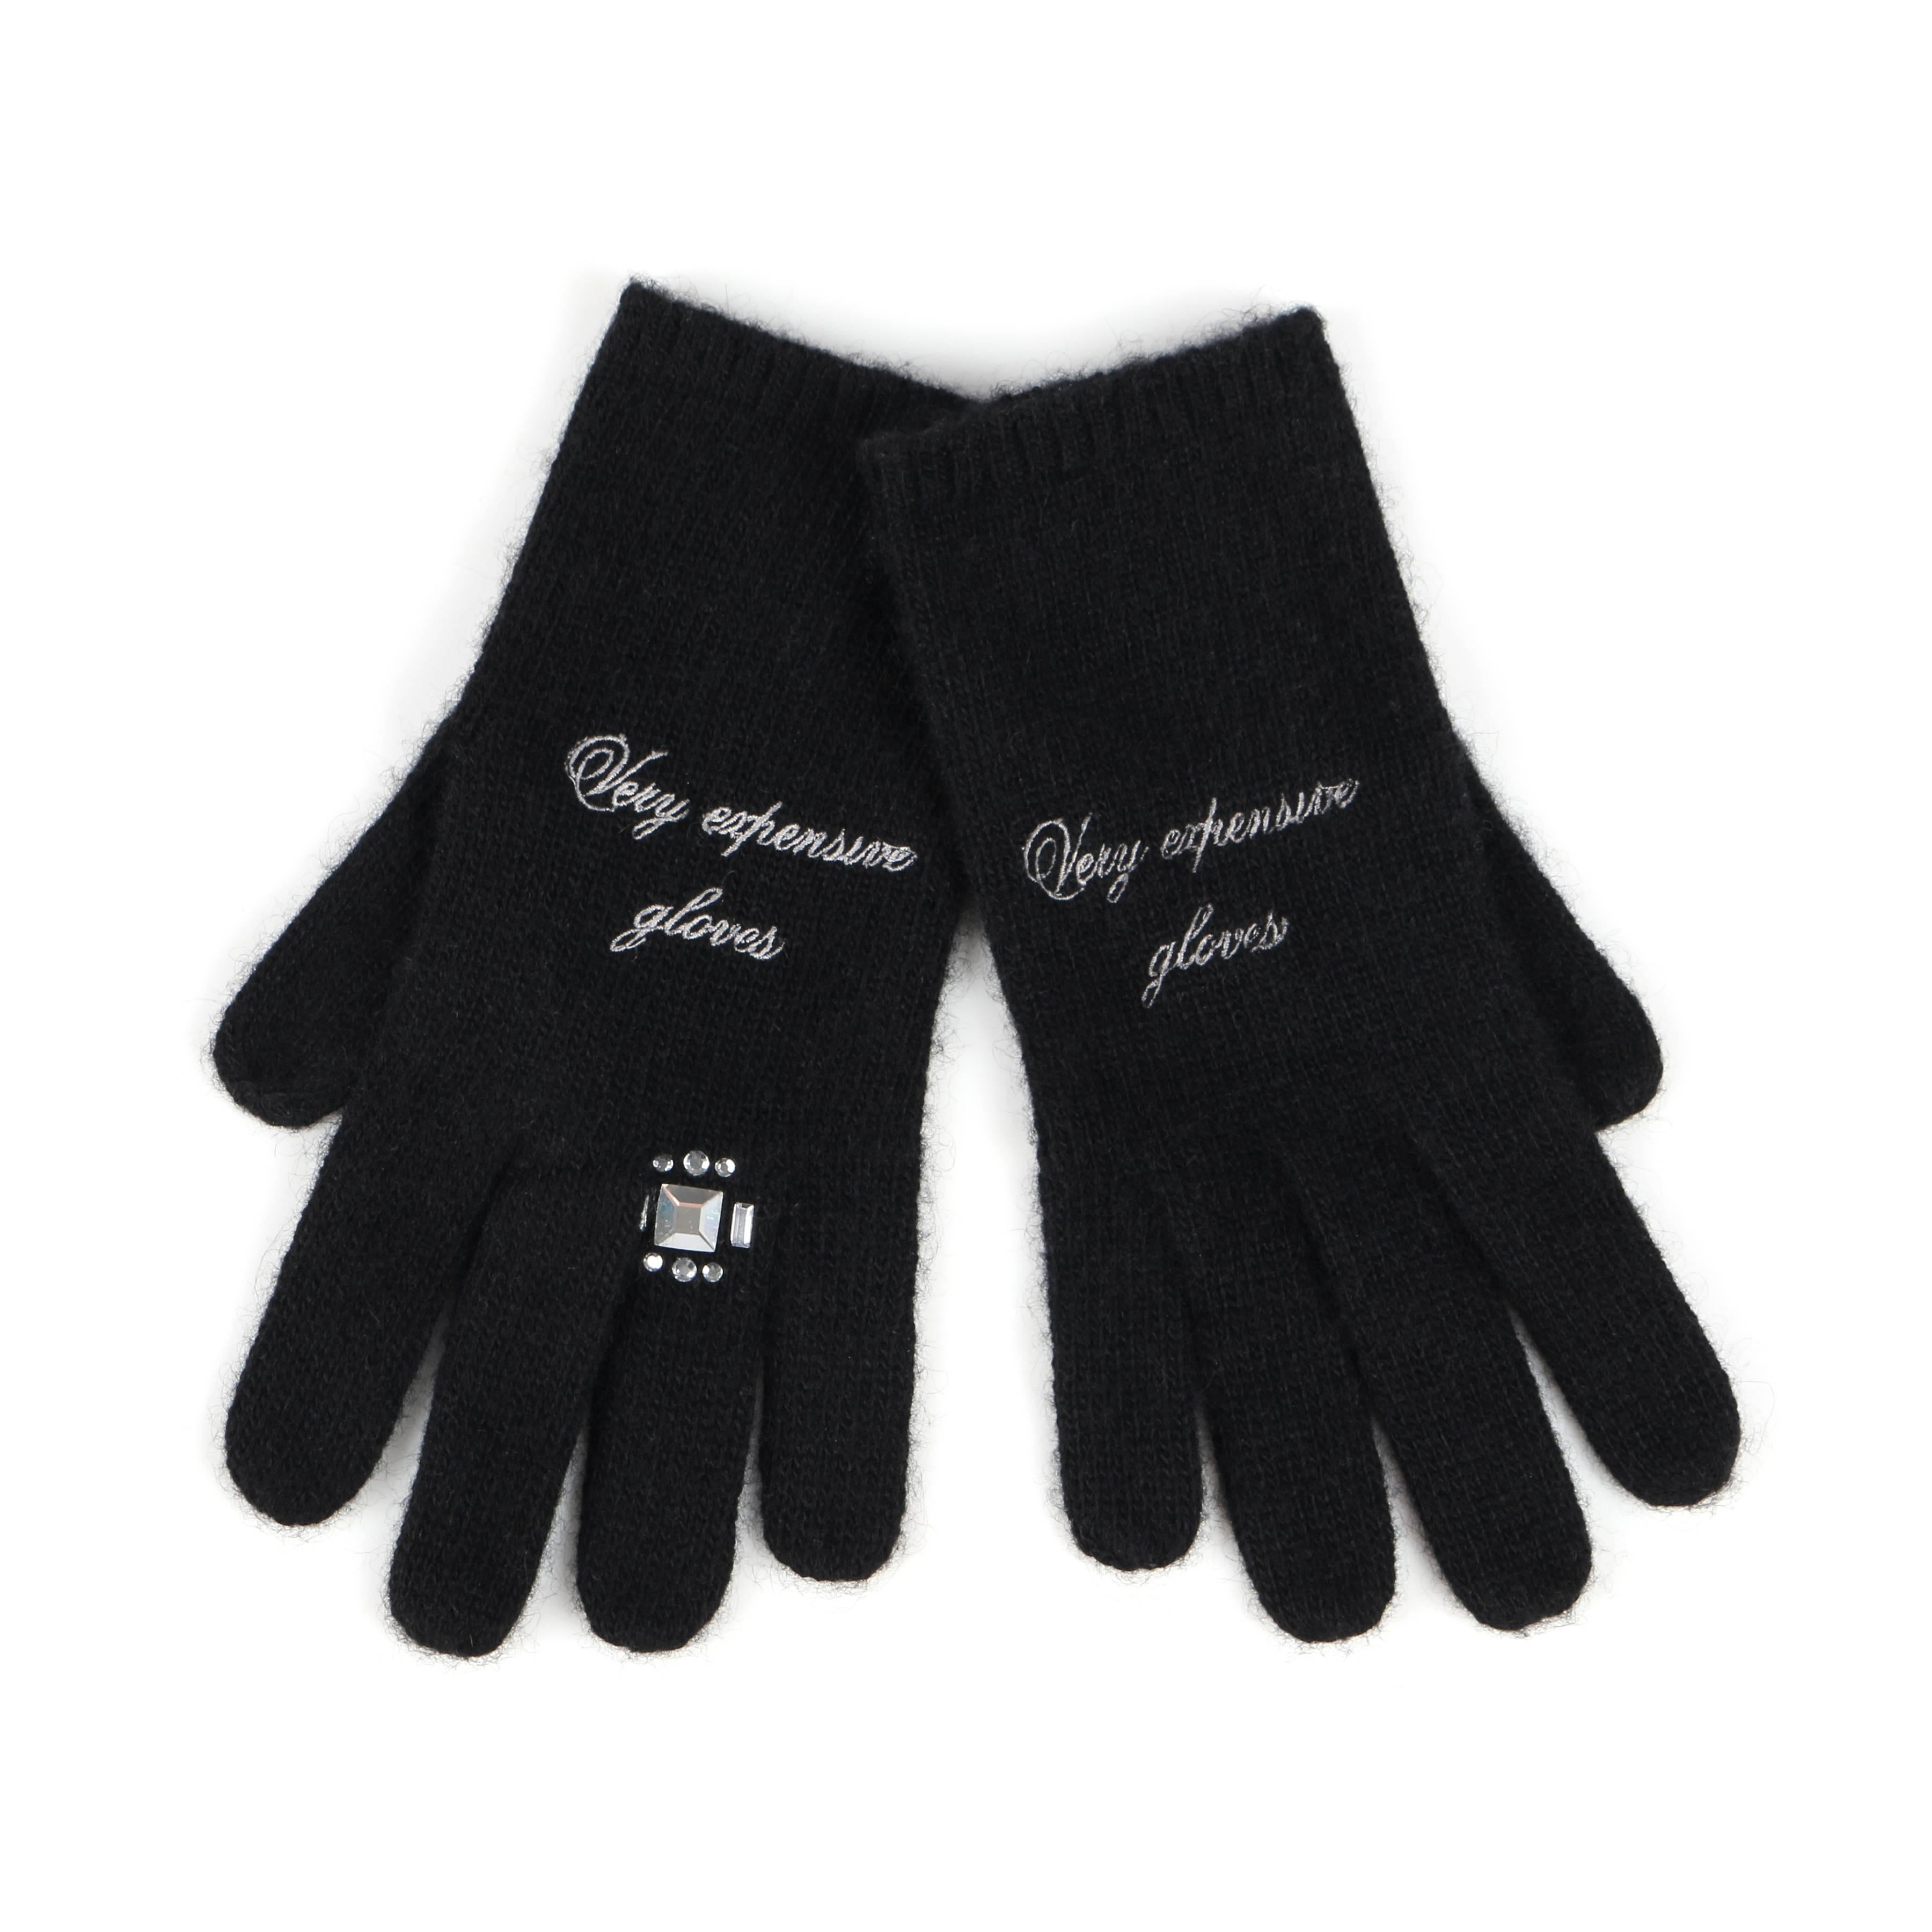 MOSCHINO "Very expensive gloves" Black Rhinestone 100% Cashmere Gloves For  Sale at 1stDibs | moschino gloves, black cashmere gloves